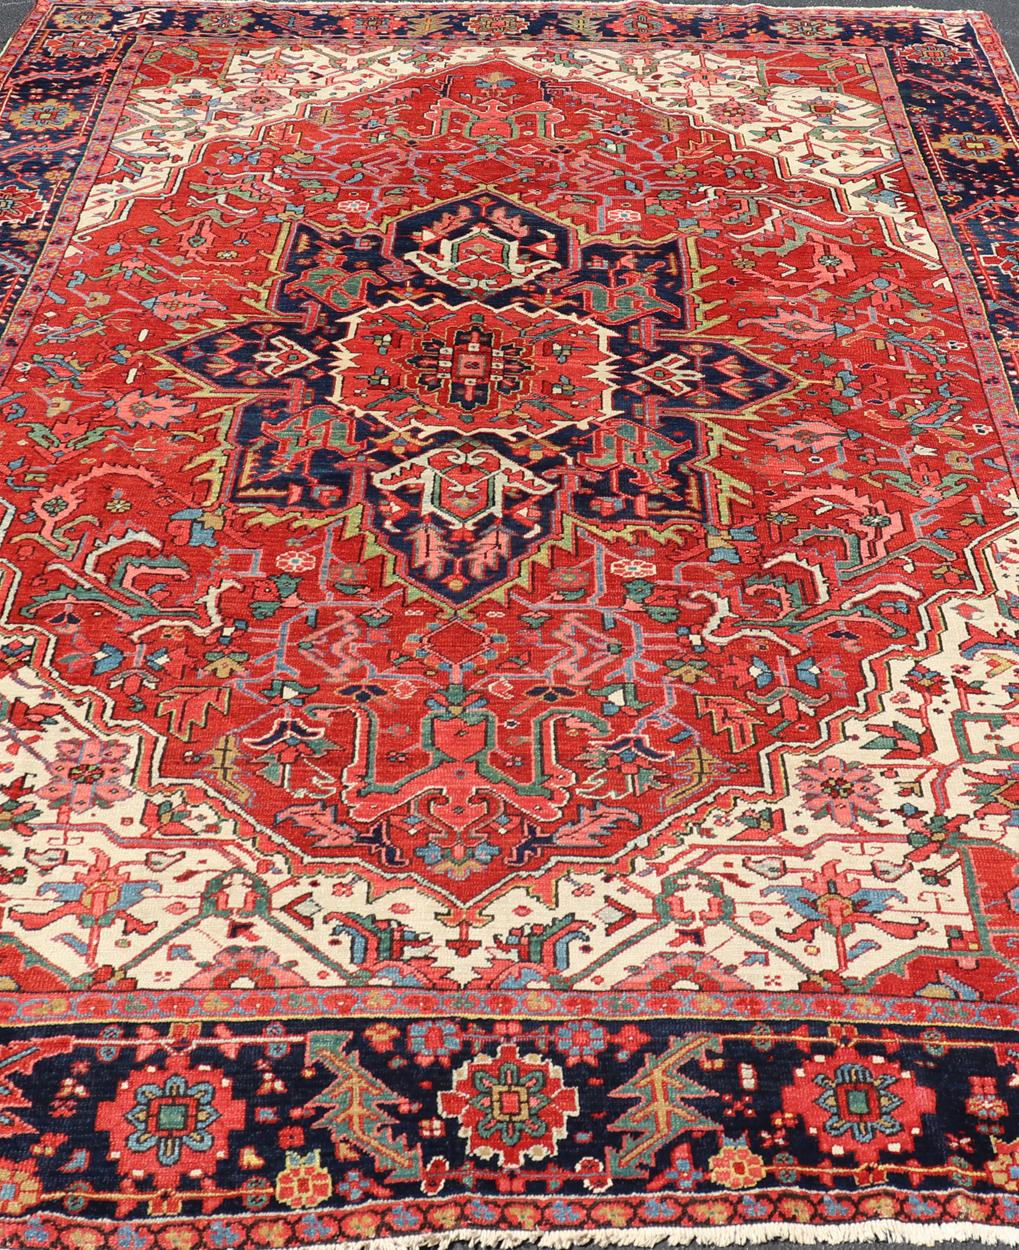 Antique Heriz Carpet with Stylized Central Medallion Set on Tomato Red Field. Keivan Woven Arts / Rug / VR-8759 / country of origin / type: Persian / Serapi, circa early-20th century.
Measures: 8'4 x 11'8.
This beautiful antique Persian Heriz carpet